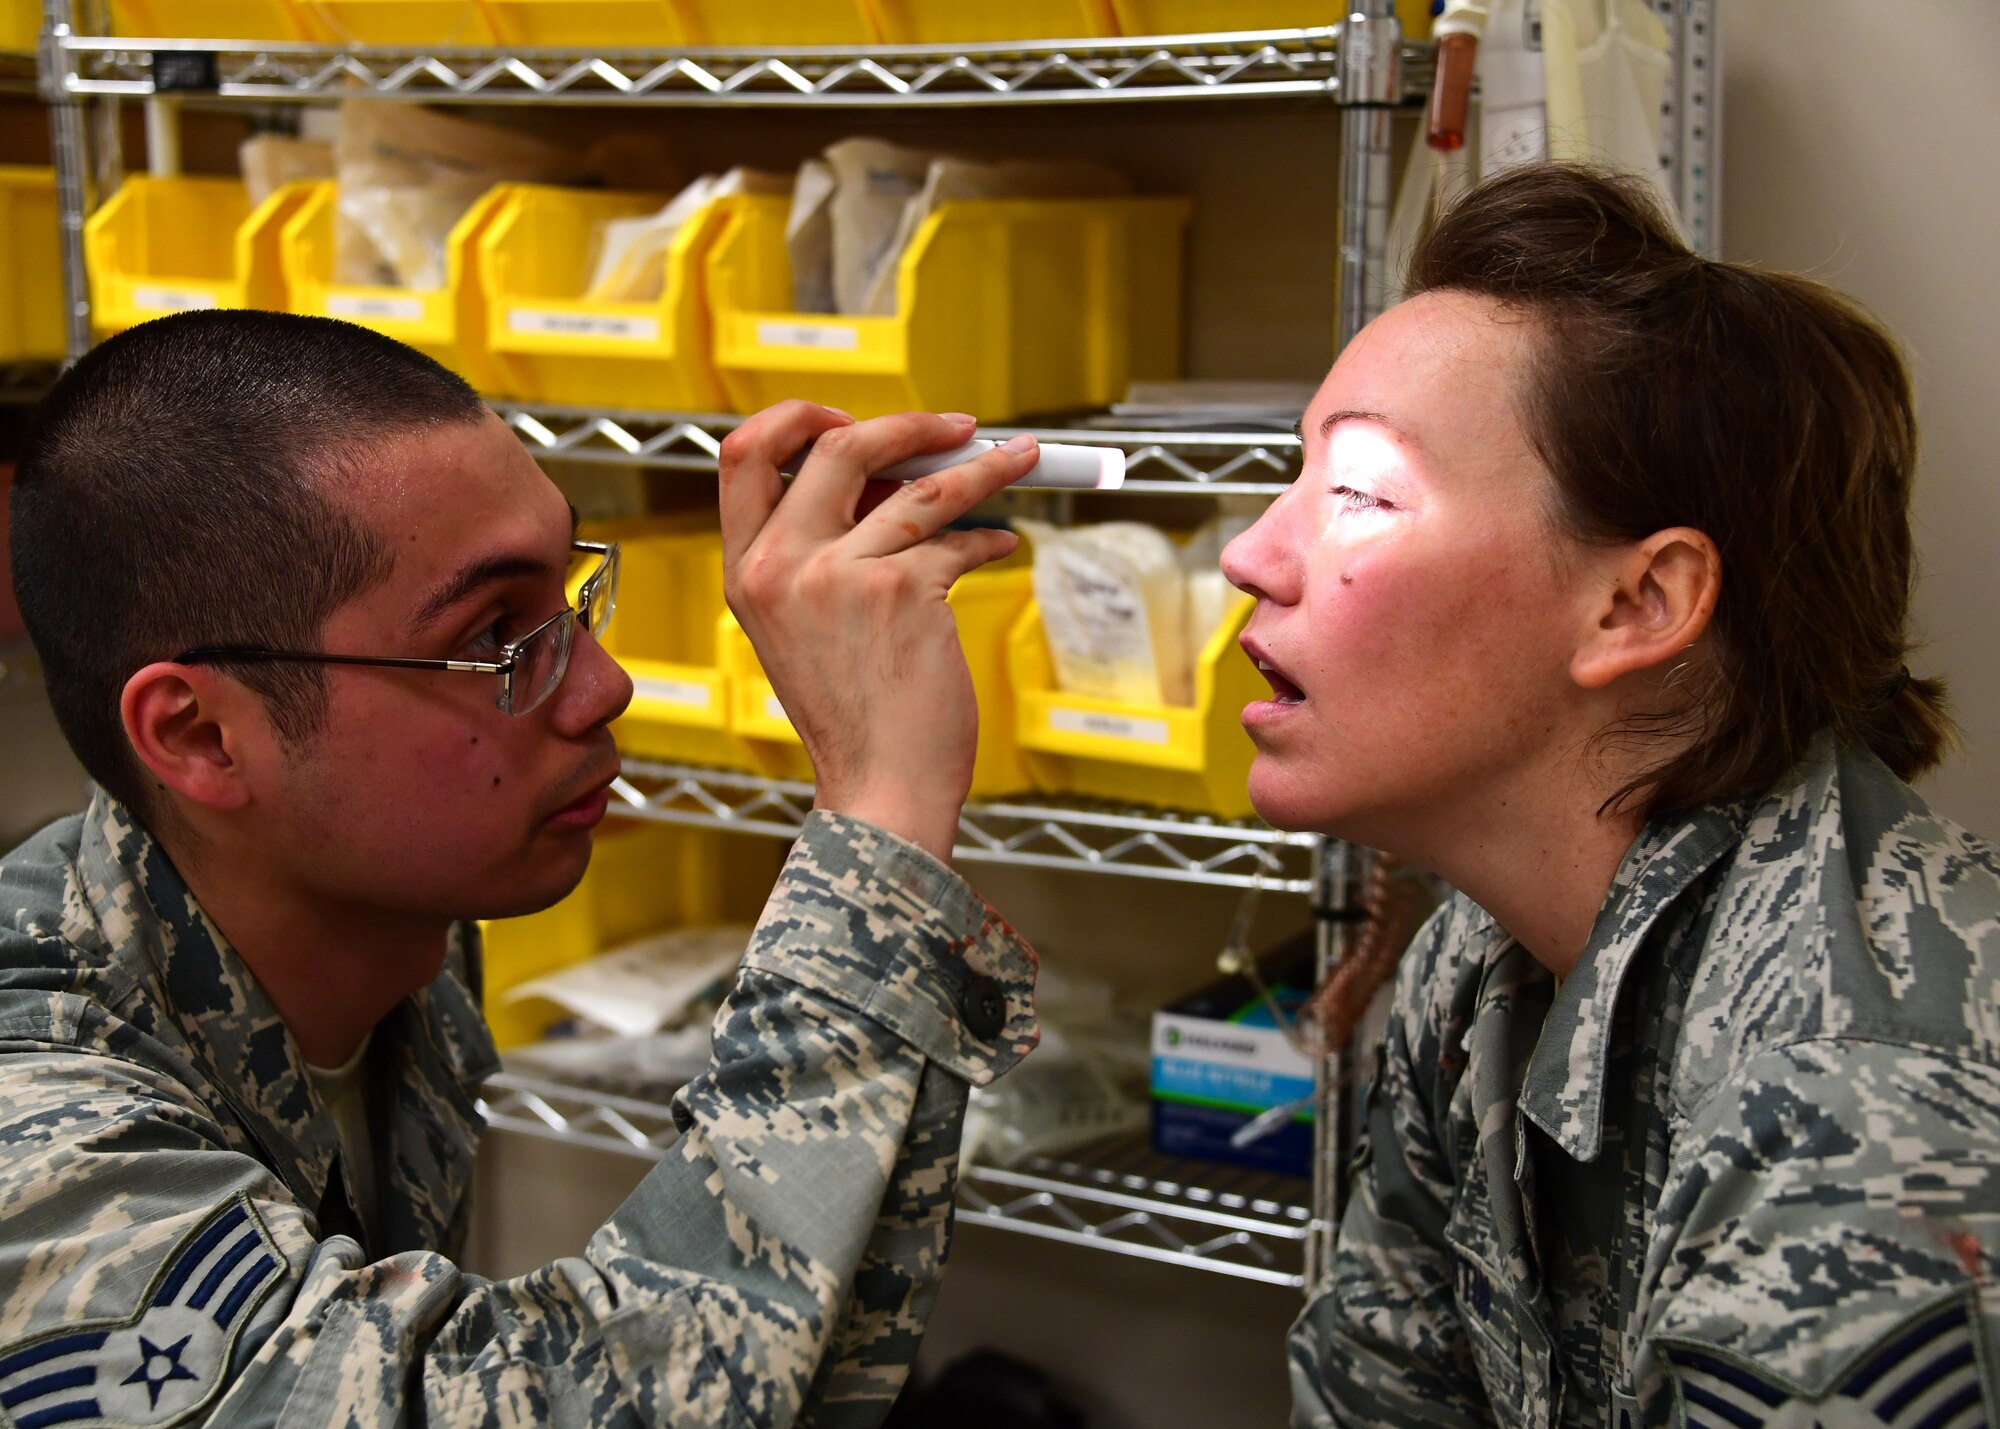 Senior Airman Luke Block, medical technician with the 911th Aeromedical Staging Squadron, simulates an assessment of Tech Sgt. Nicole Martin, aerospace medical technician with the 911th ASTS, during a simulation at Fort Indiantown Gap, Pennsylvania, June 20, 2019. Martin was acting as a concussed Airman for the simulation and had to be attended to to by the students. (U.S. Air Force photo by Senior Airman Grace Thomson)